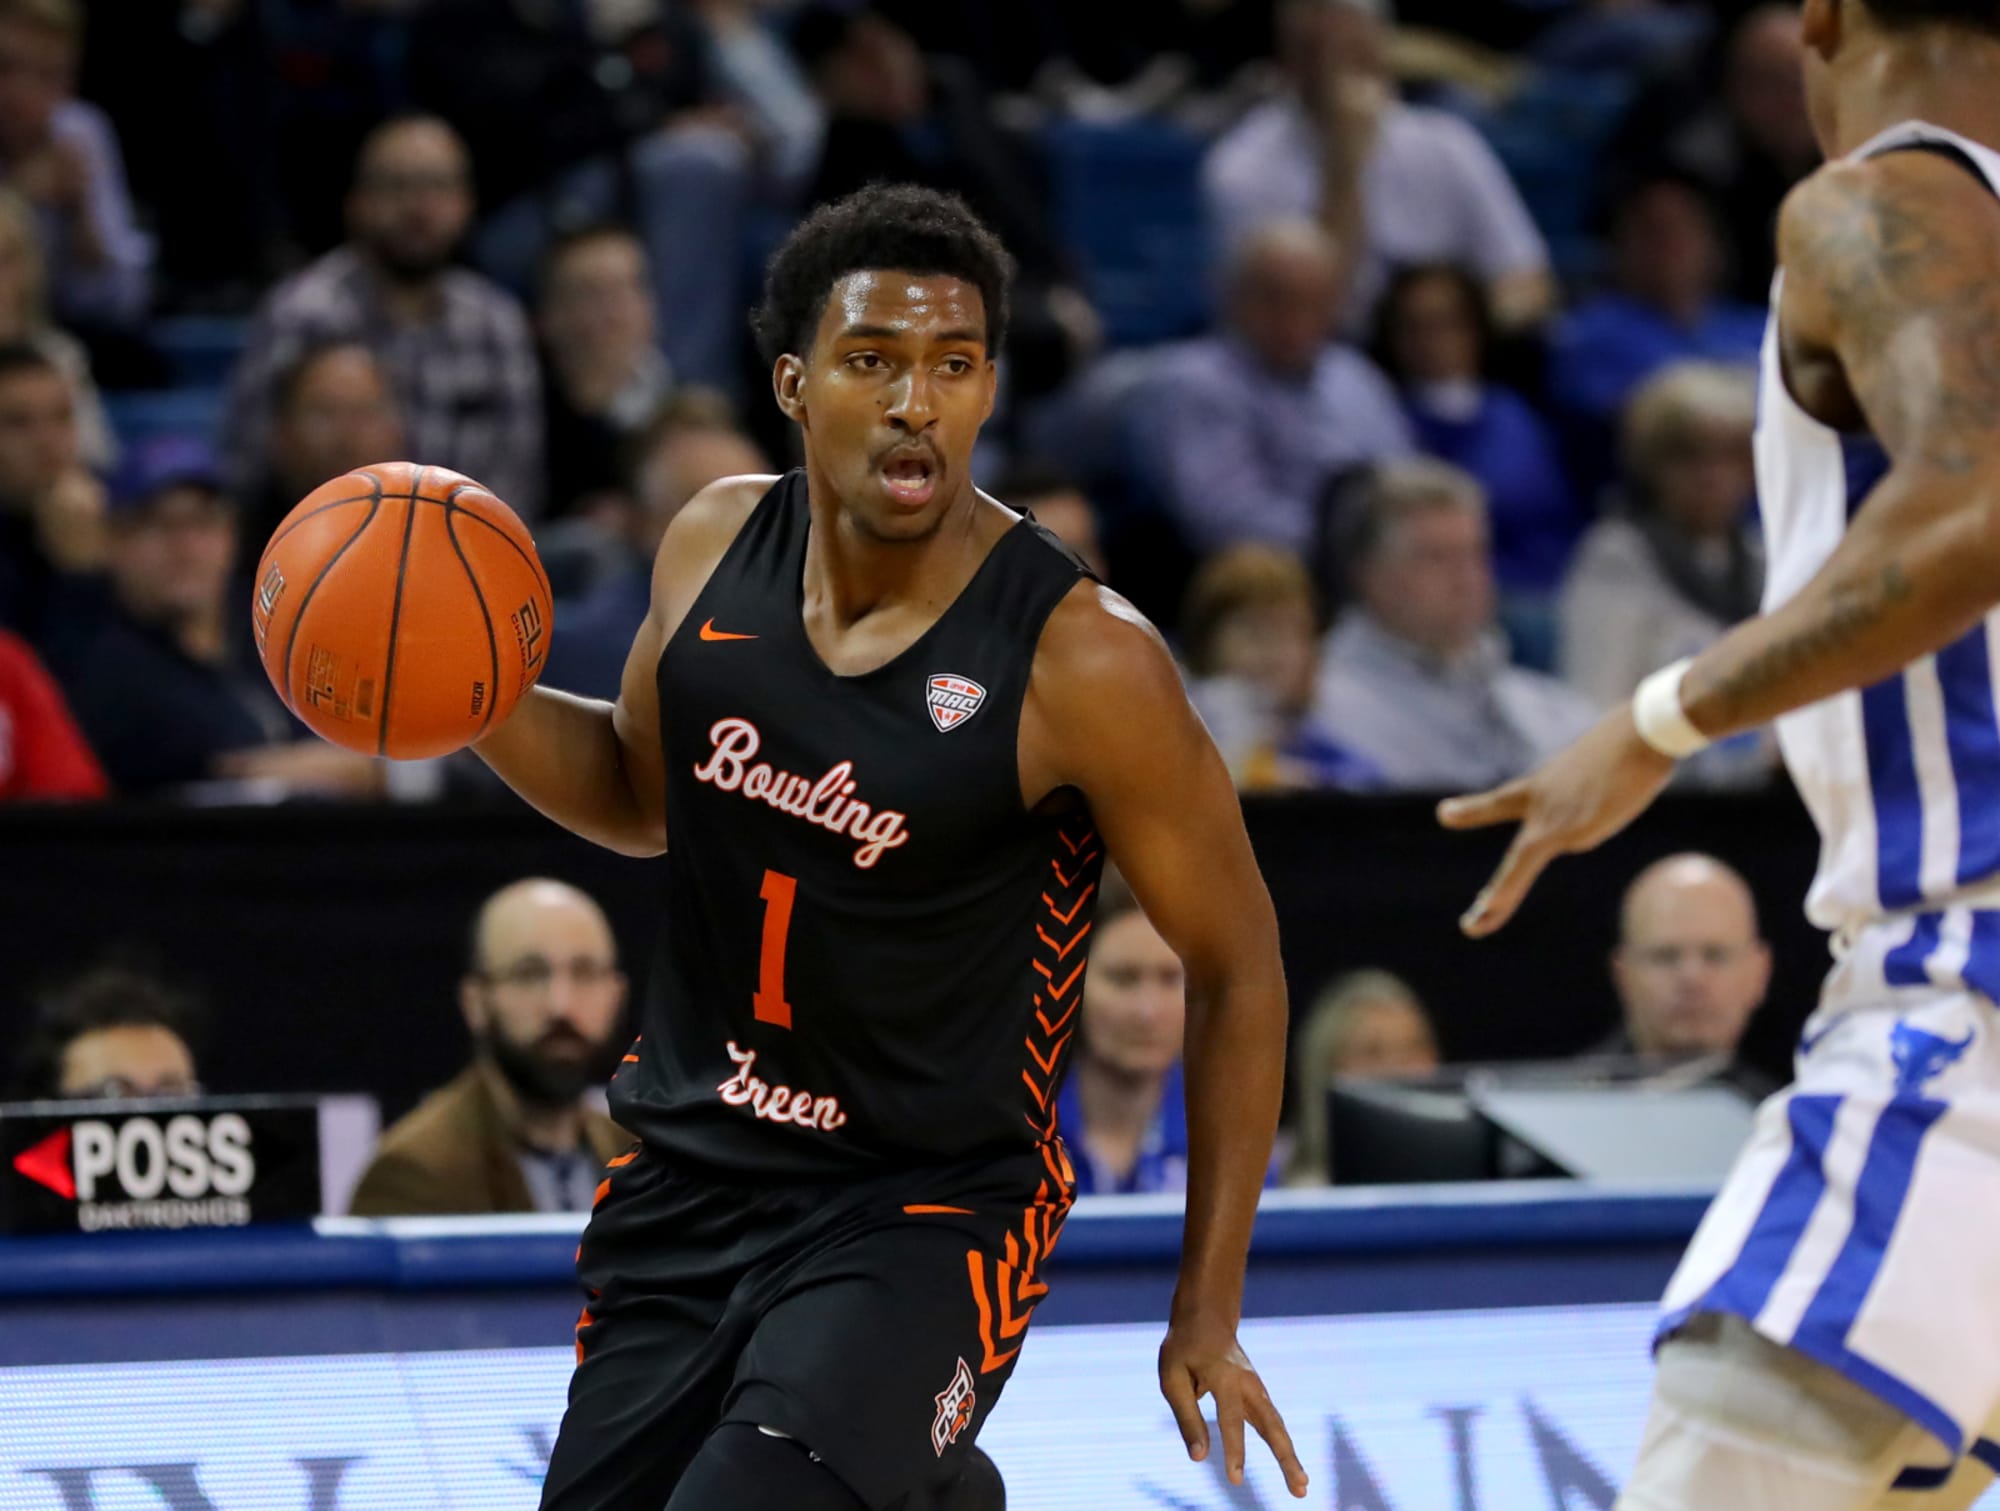 Justin Turner is the player Louisville basketball needs for 2020-21